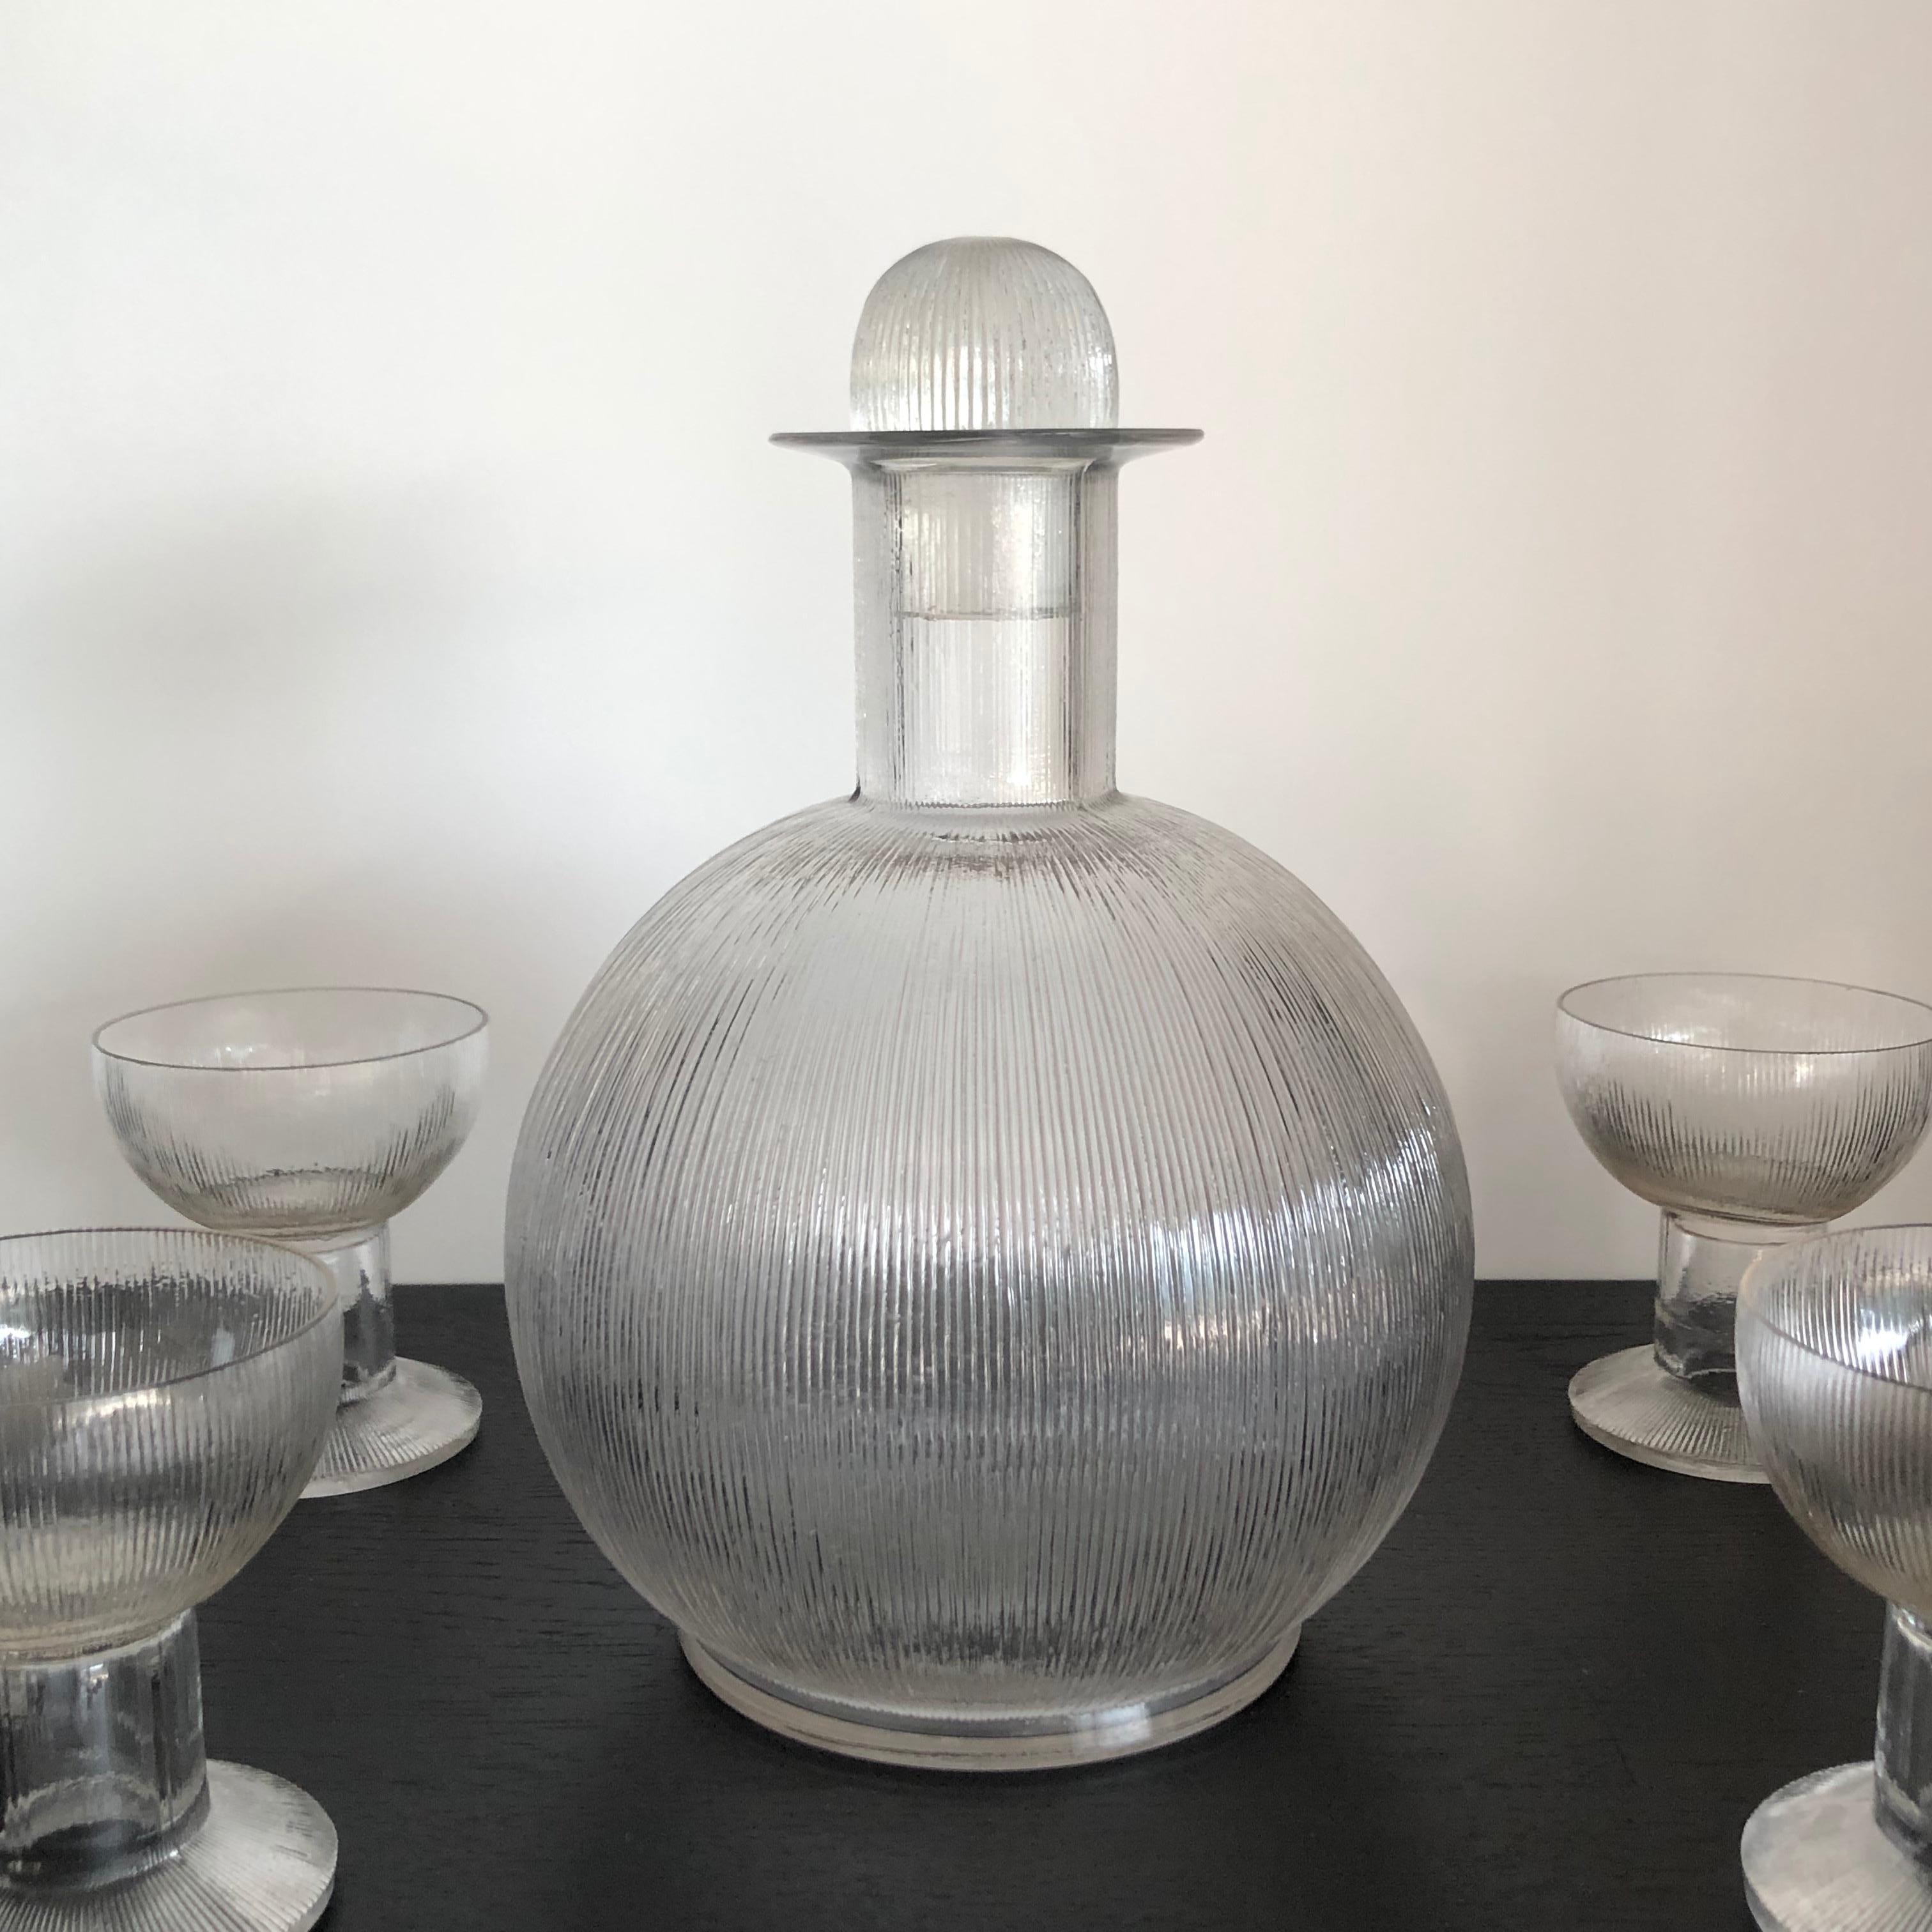 Molded 1926 Rene Lalique Wingen Set 11 Pieces Drinking Glasses Stems and Decanter